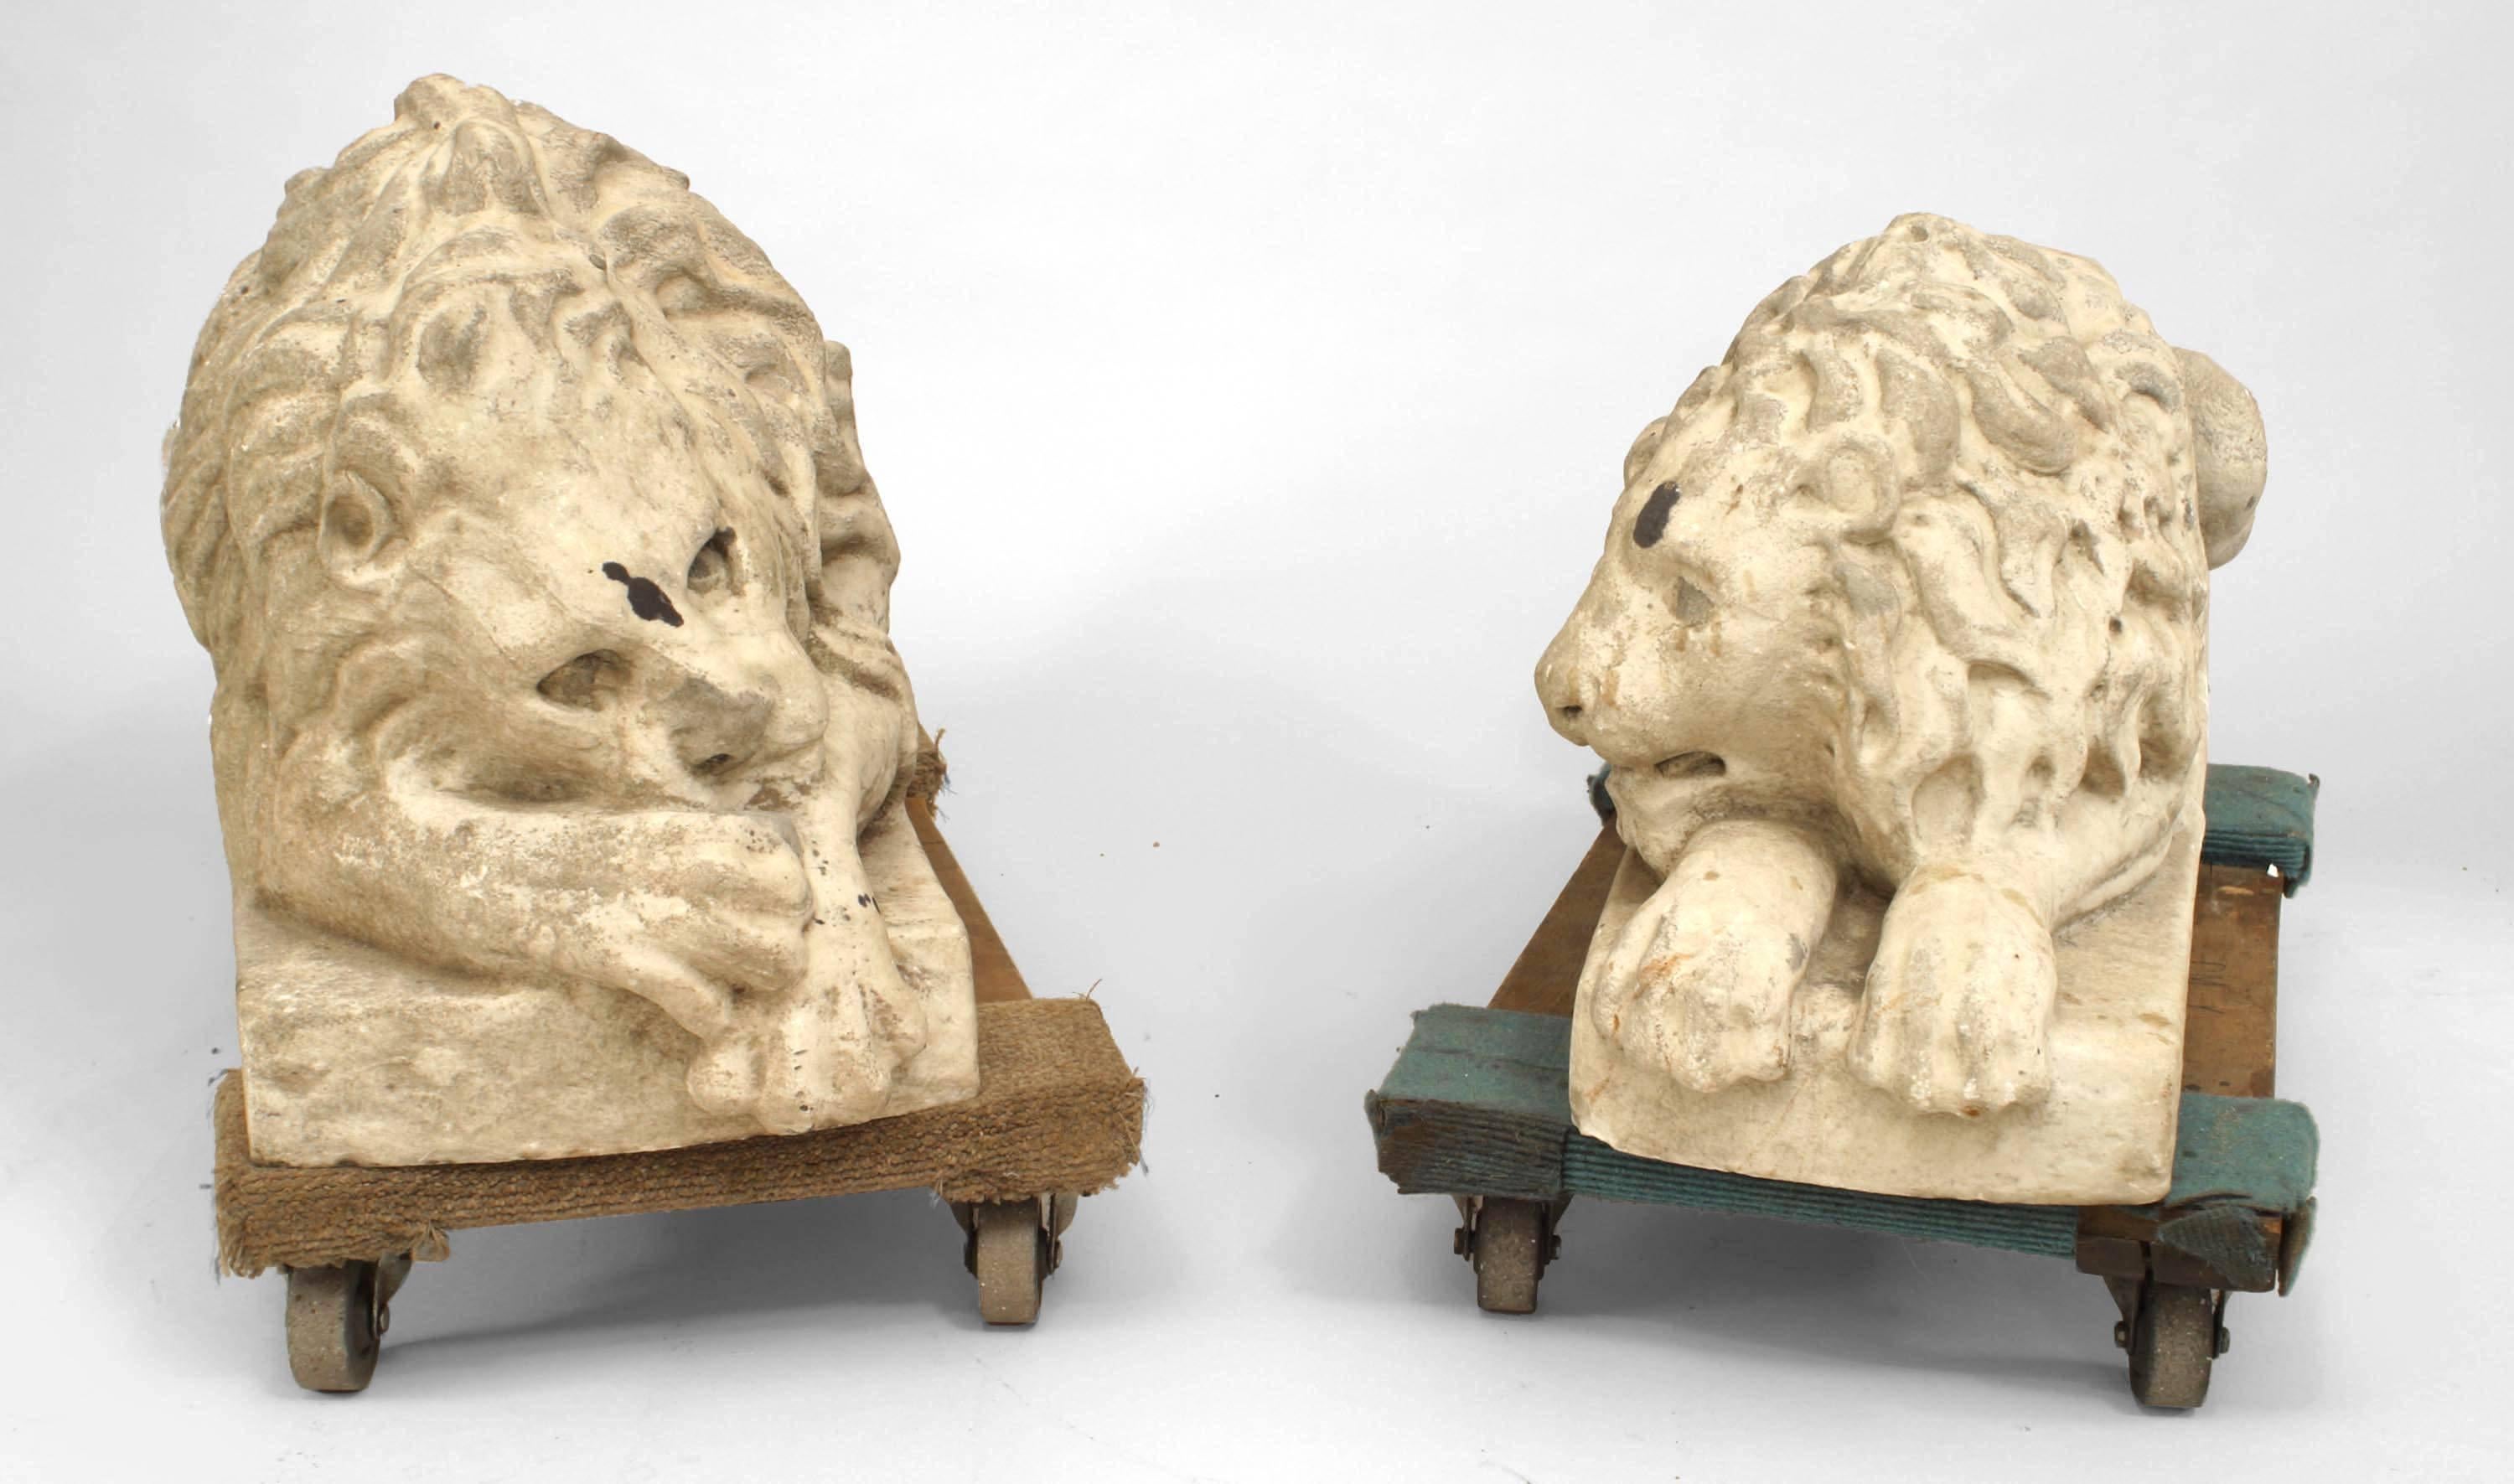 Pair of Outdoor Italian (early 19th Cent) white marble figures of two reclining lions resting on a rectangular base
